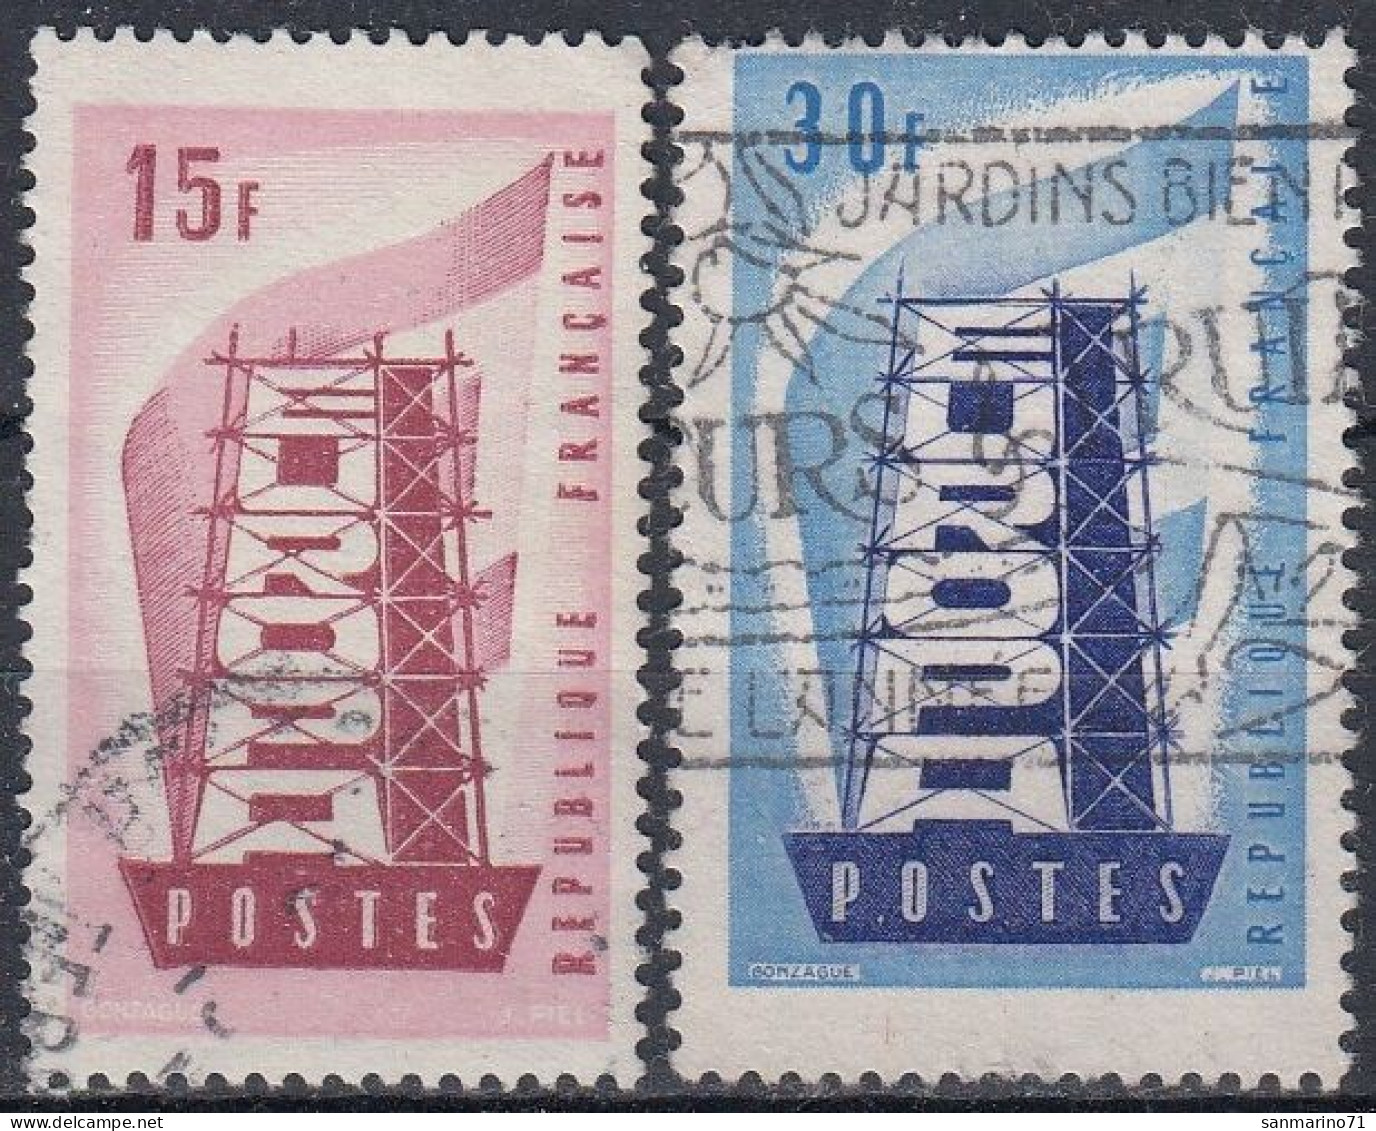 FRANCE 1104-1105,used - 1956